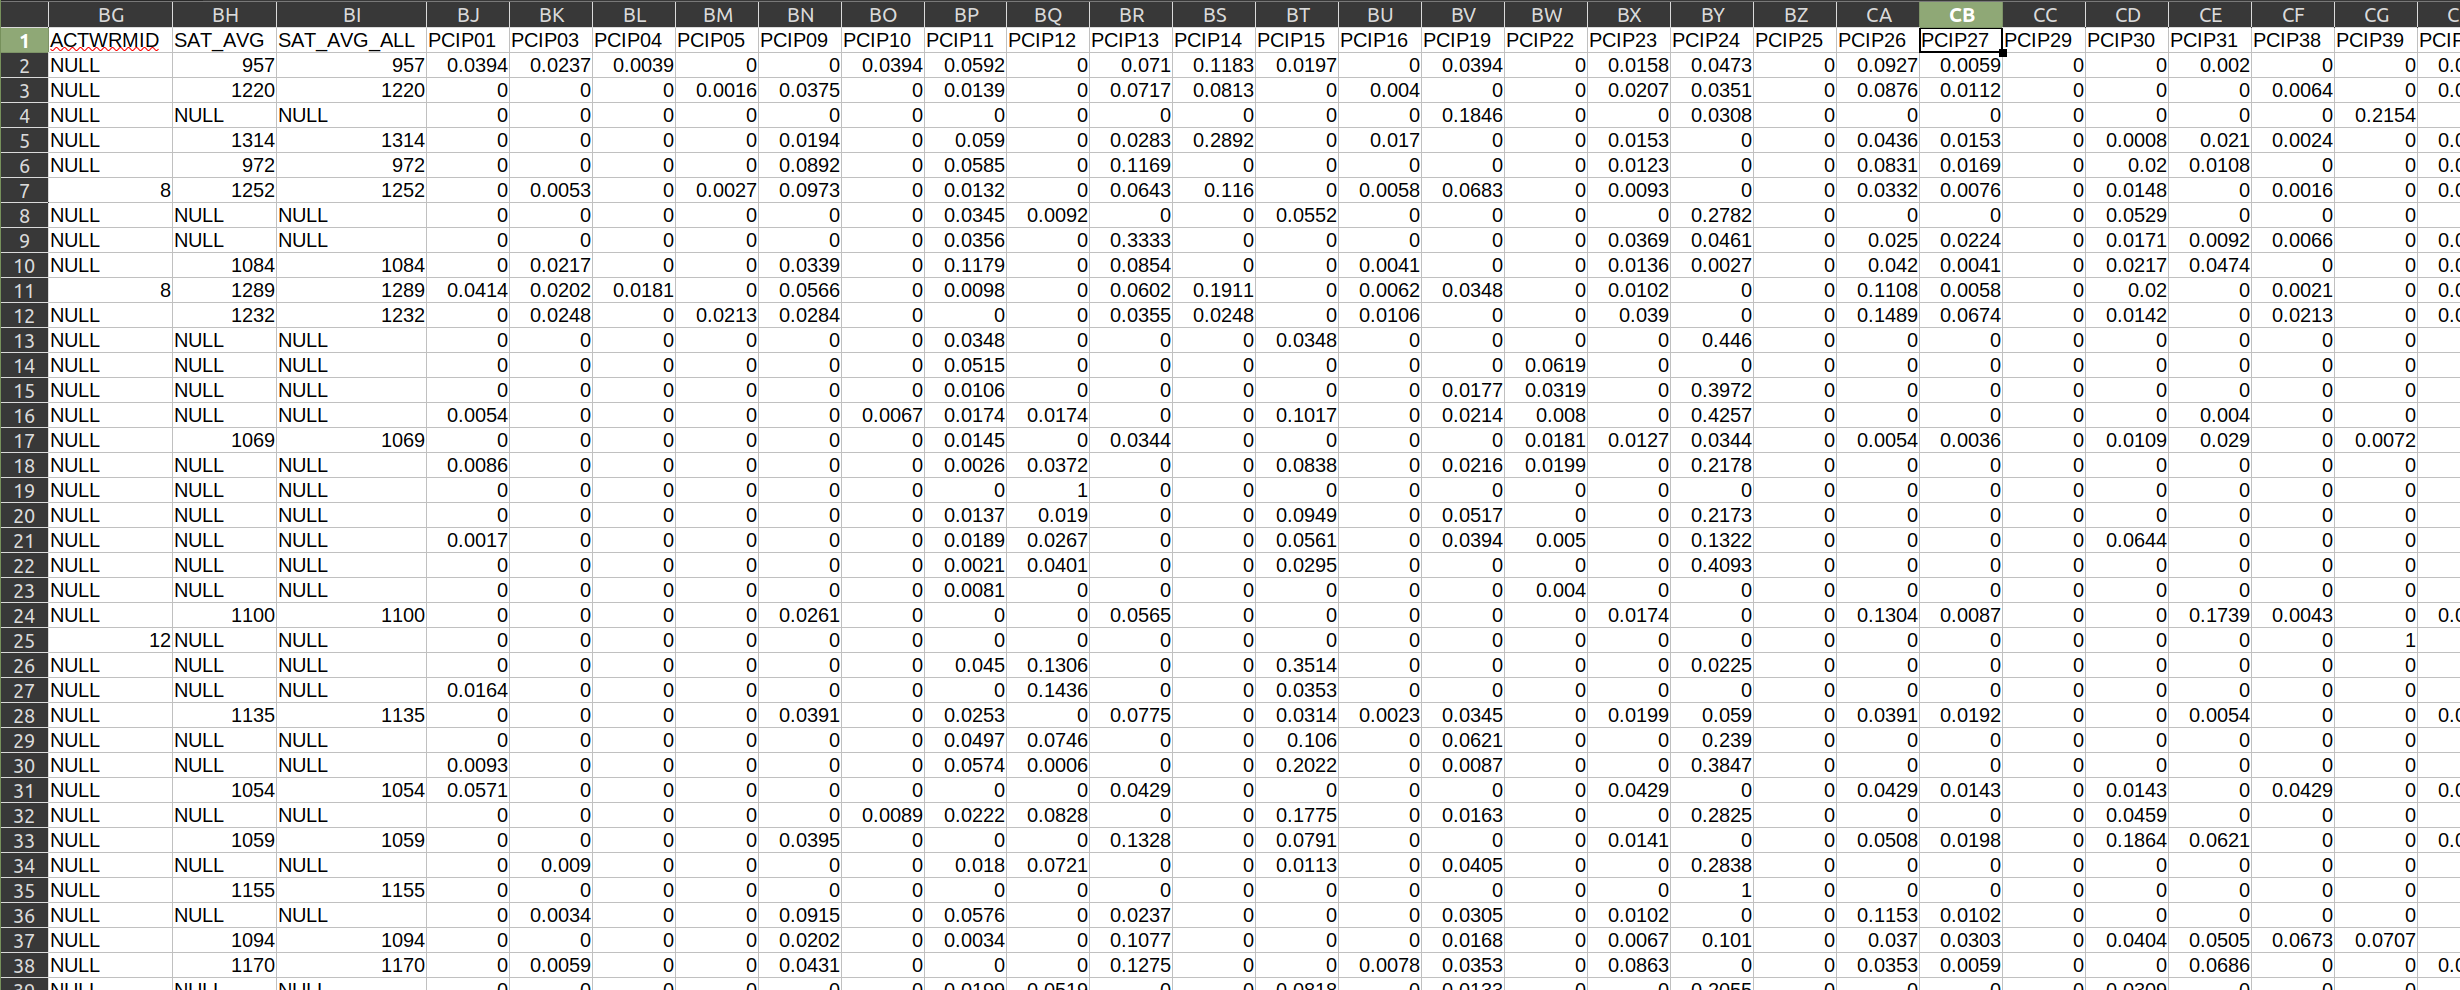 A second spreadsheet view of the College Scorecard data